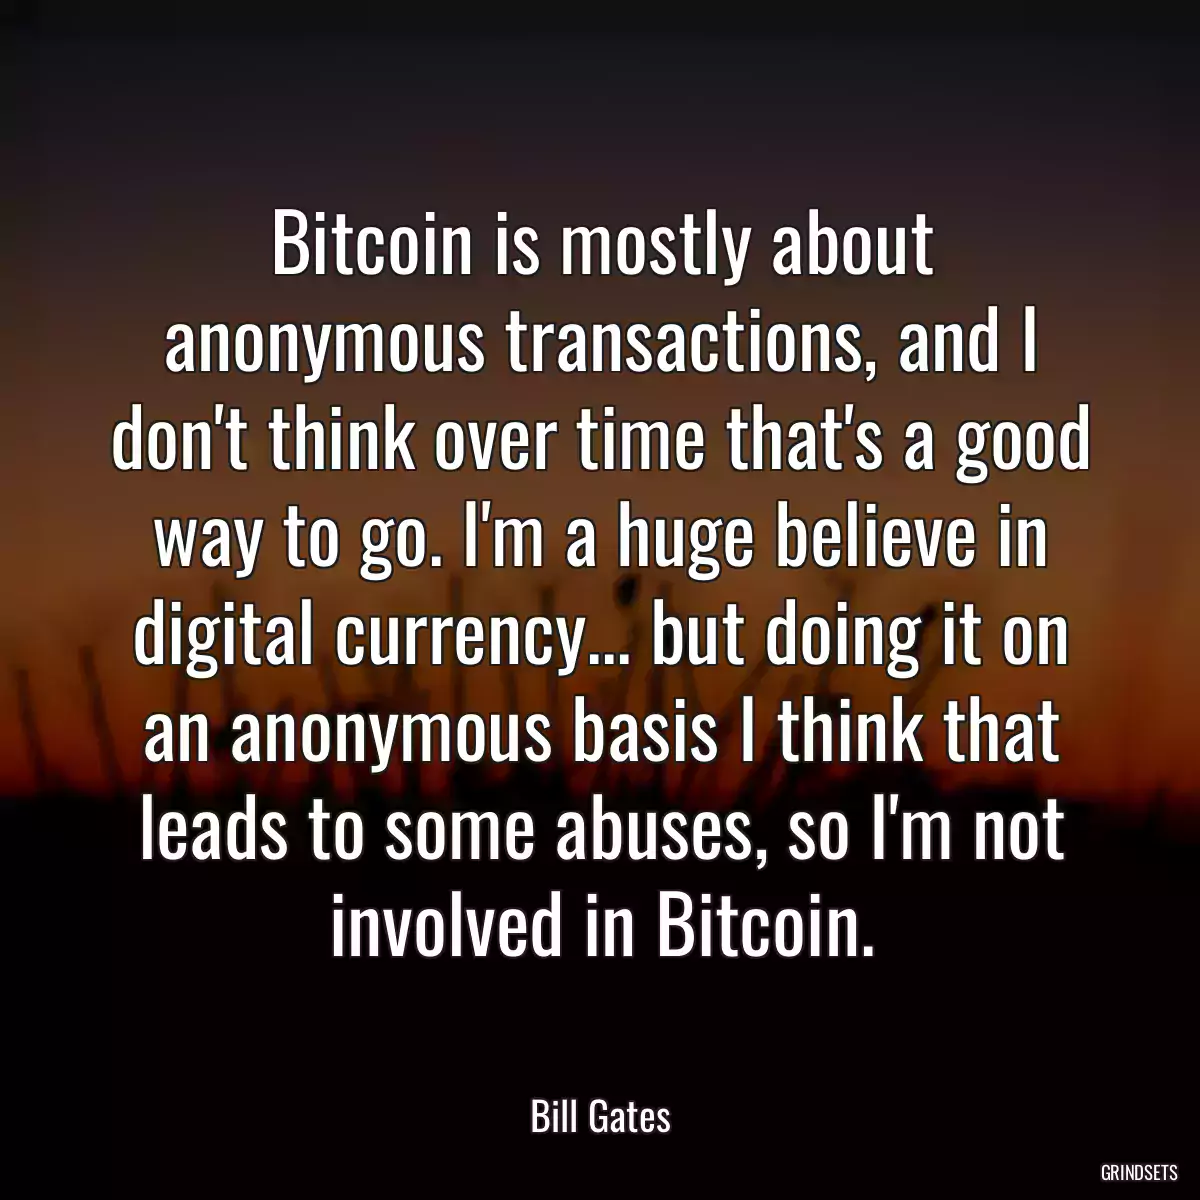 Bitcoin is mostly about anonymous transactions, and I don\'t think over time that\'s a good way to go. I\'m a huge believe in digital currency... but doing it on an anonymous basis I think that leads to some abuses, so I\'m not involved in Bitcoin.